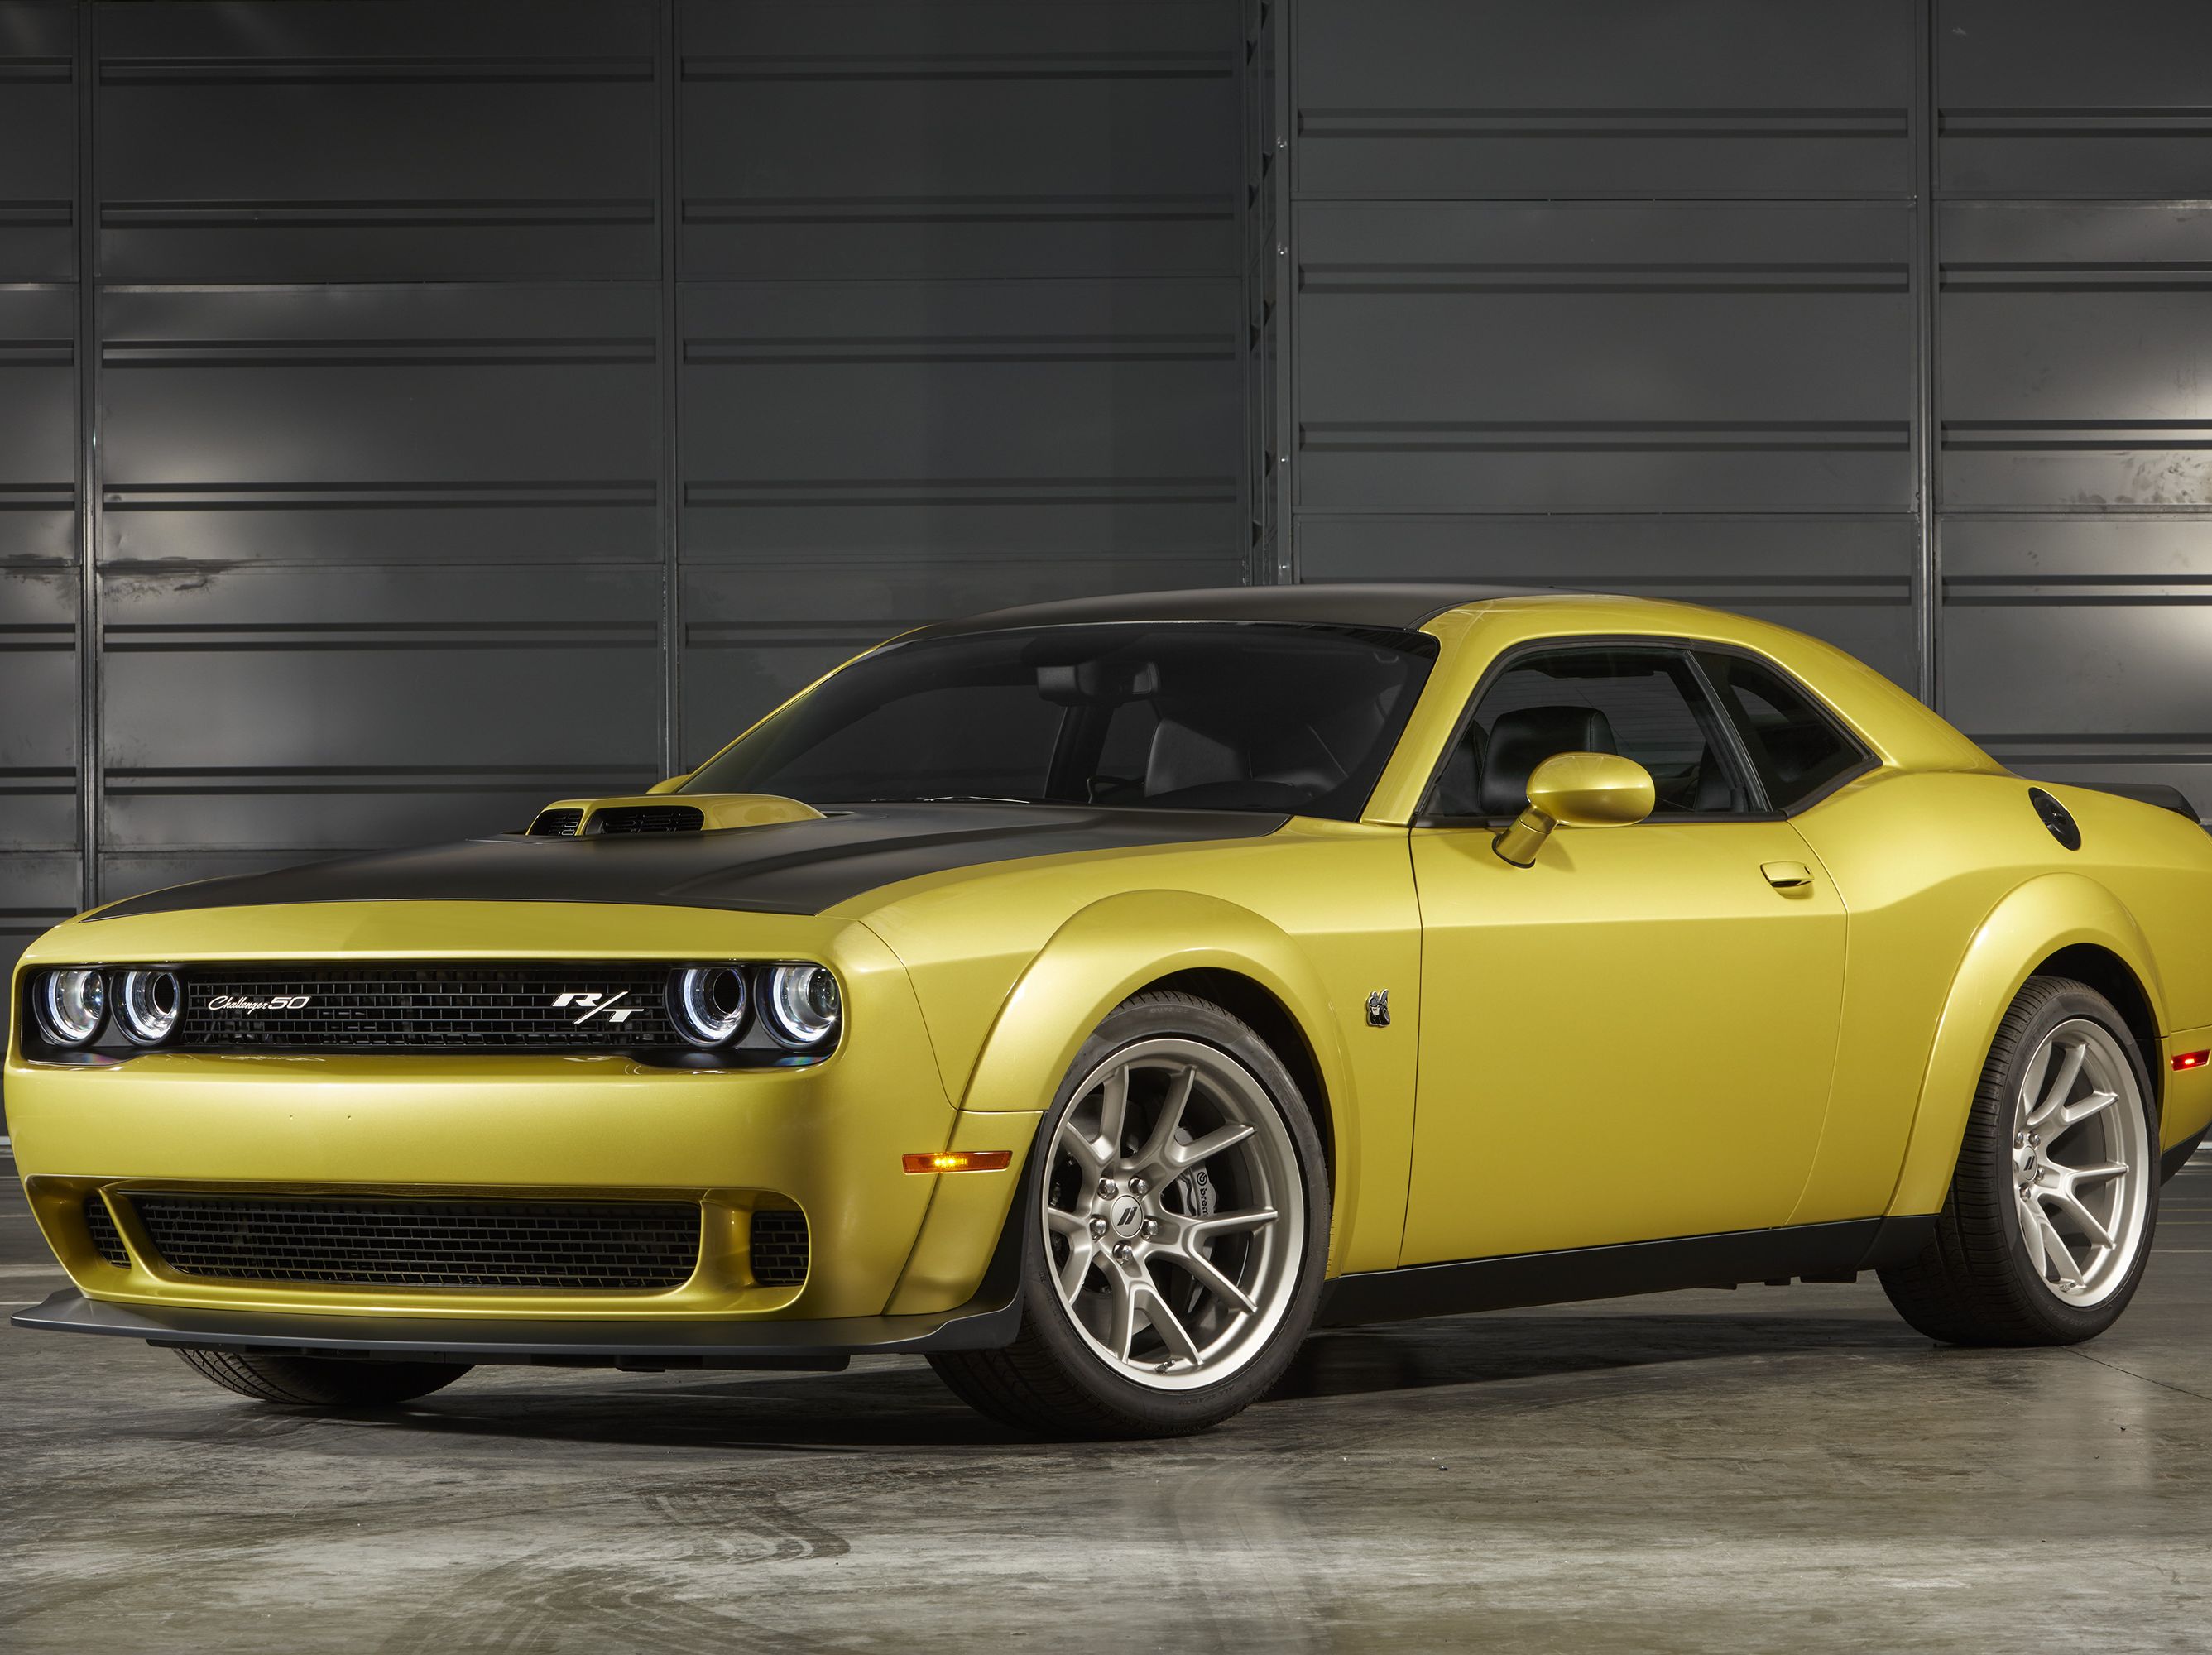 Build and Price a Challenger | Dodge Challenger for Sale